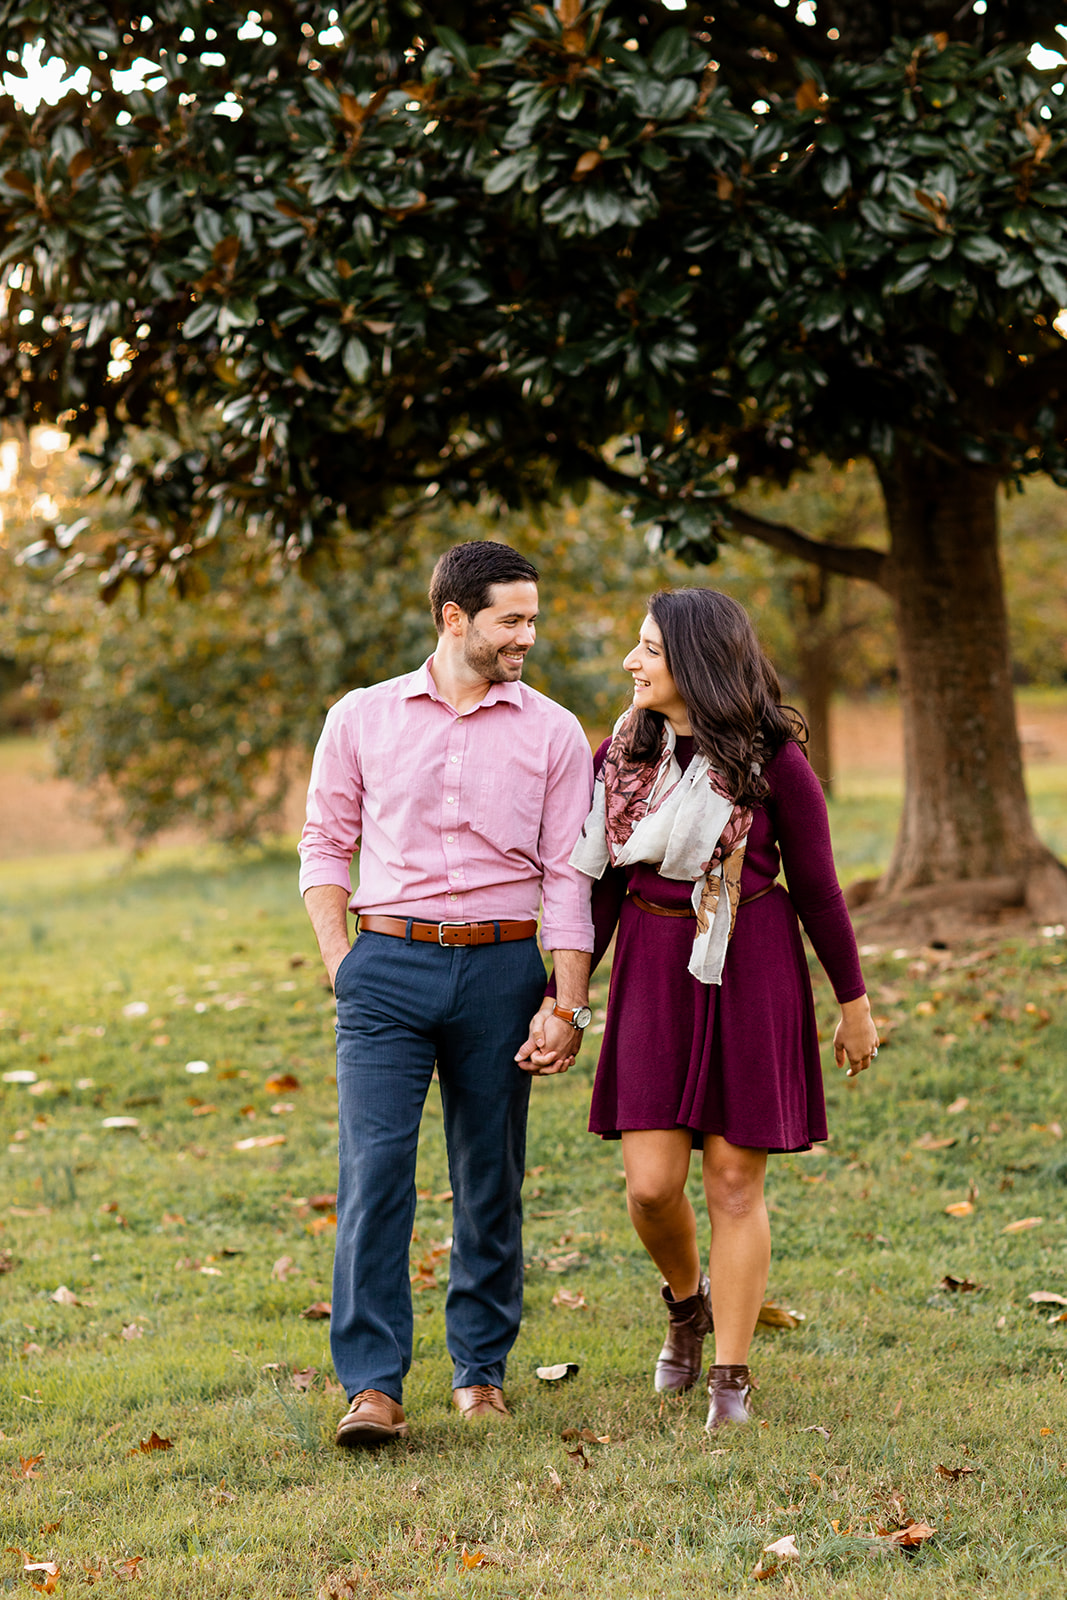 Adam  Taylors Forest Hill Park Fall Engagement Shoot - Image Property of www.j-dphoto.com